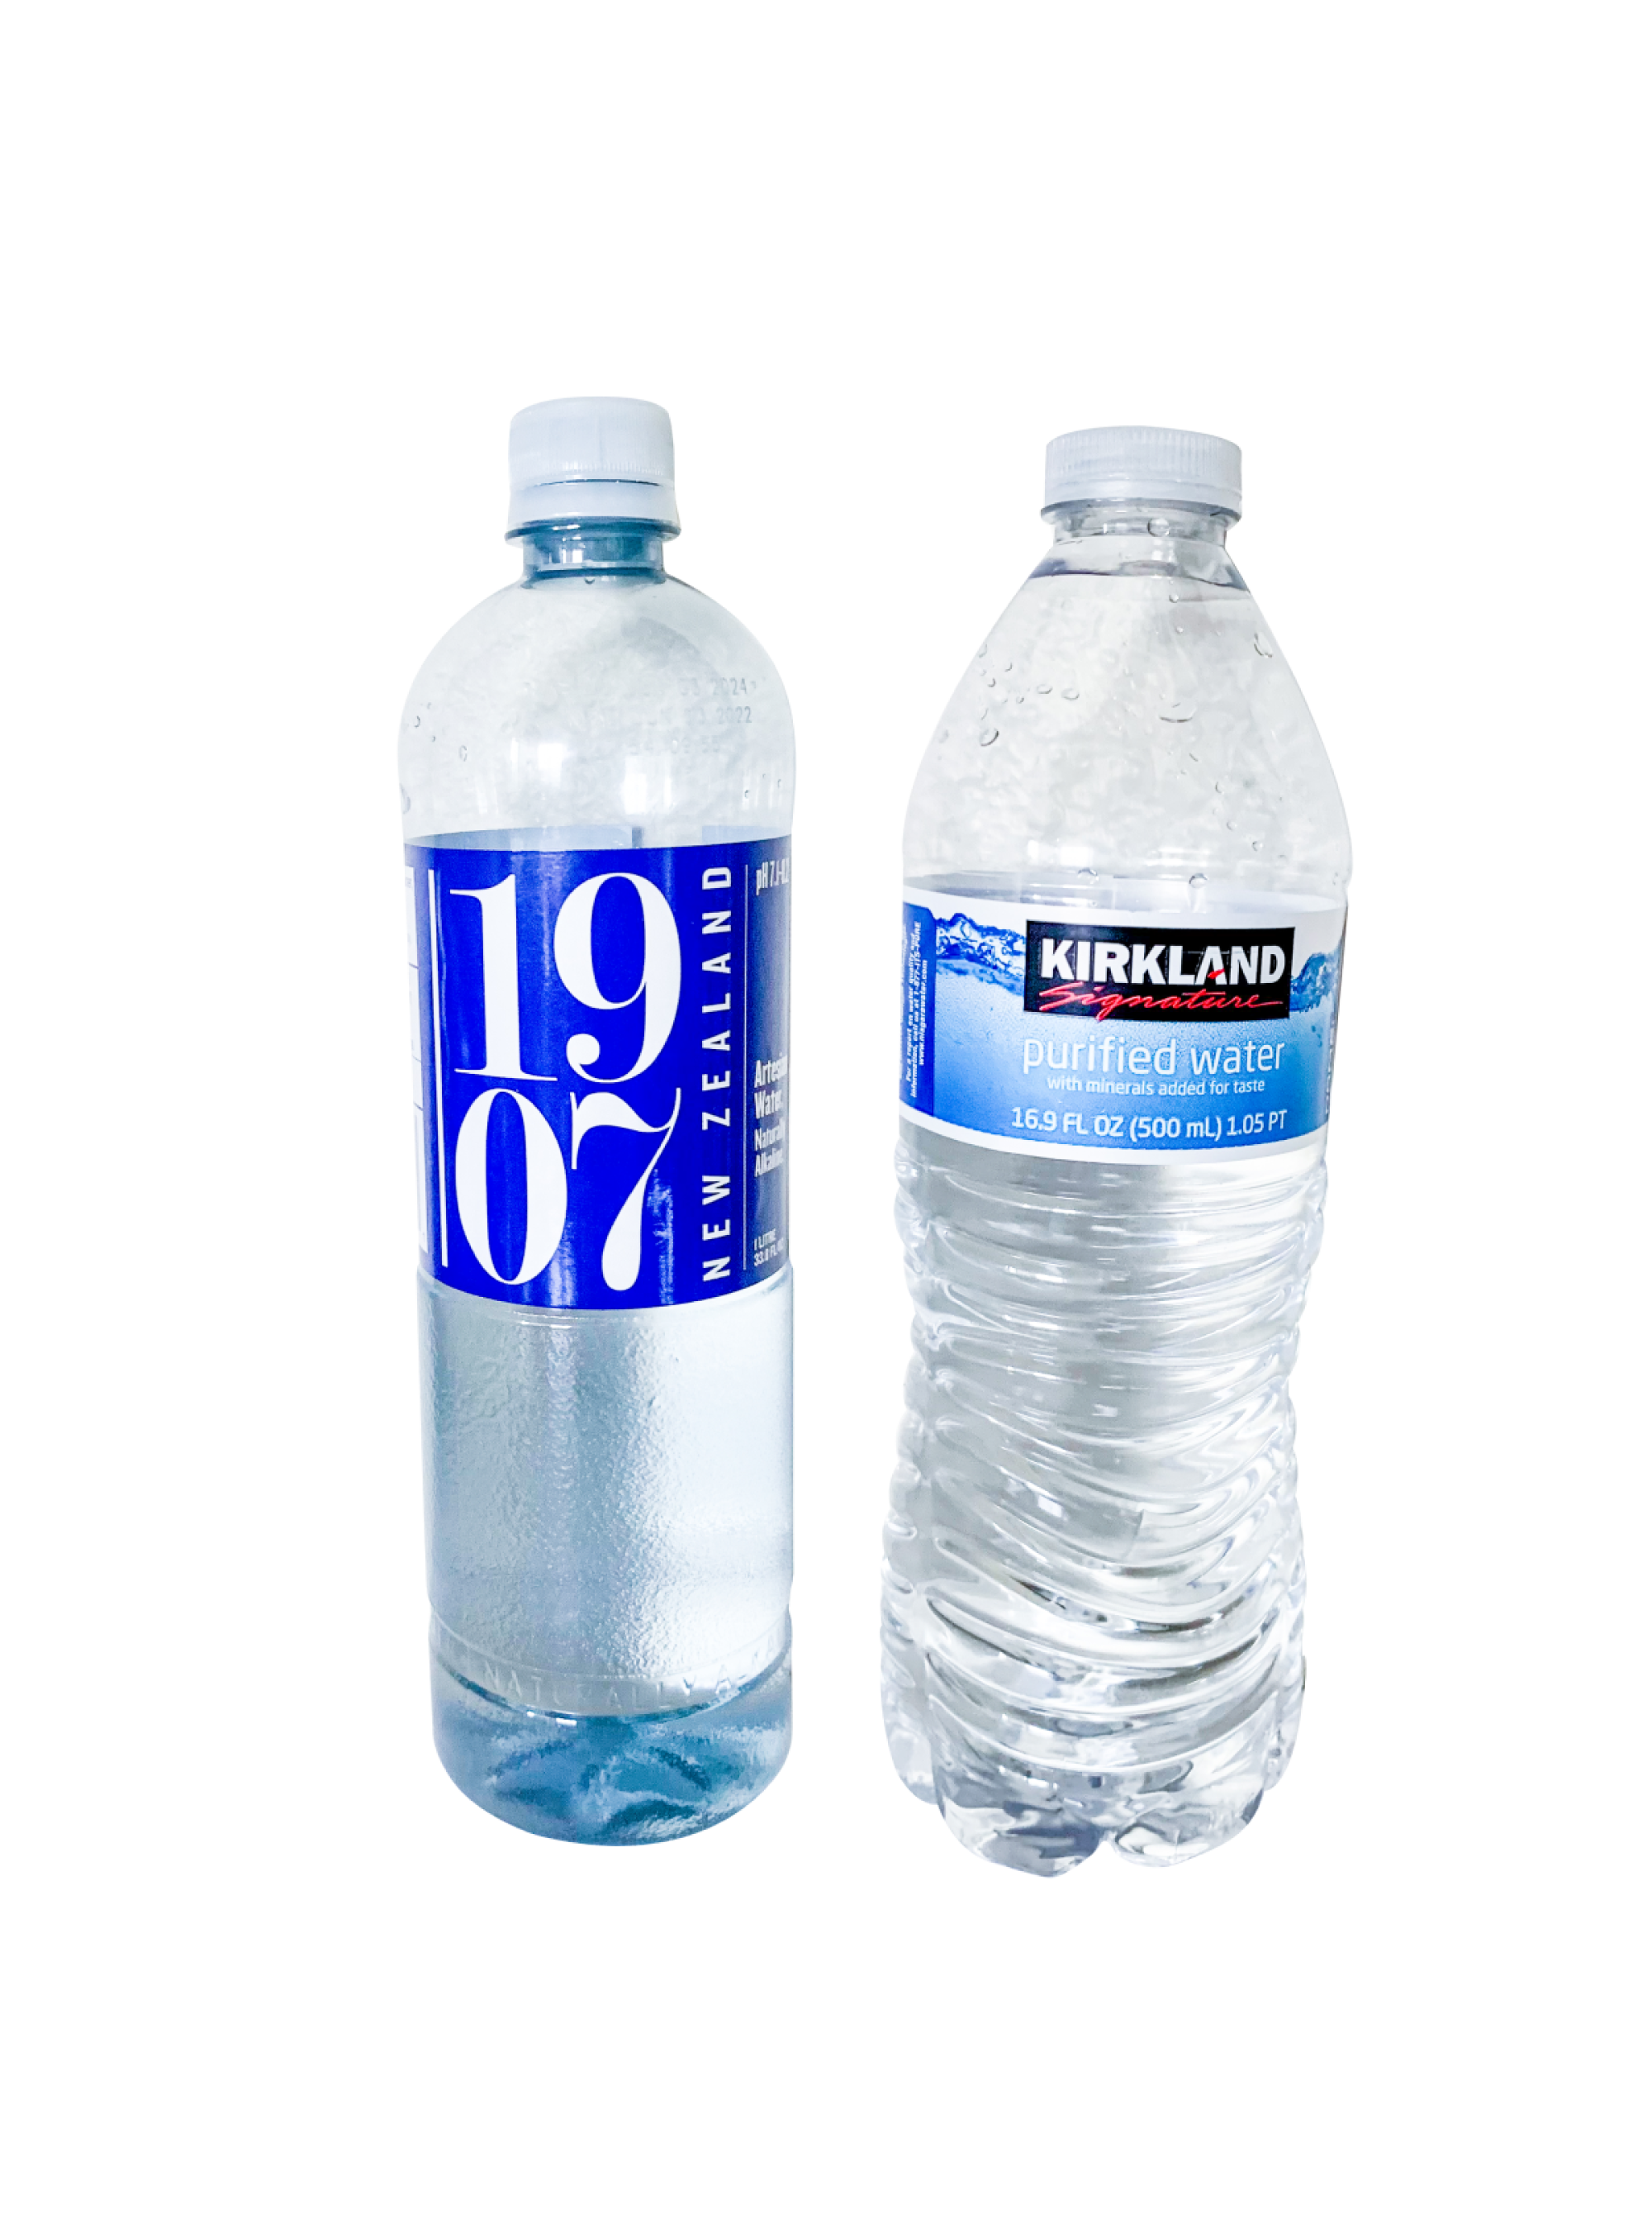 1907water and Kirkland Purified Water